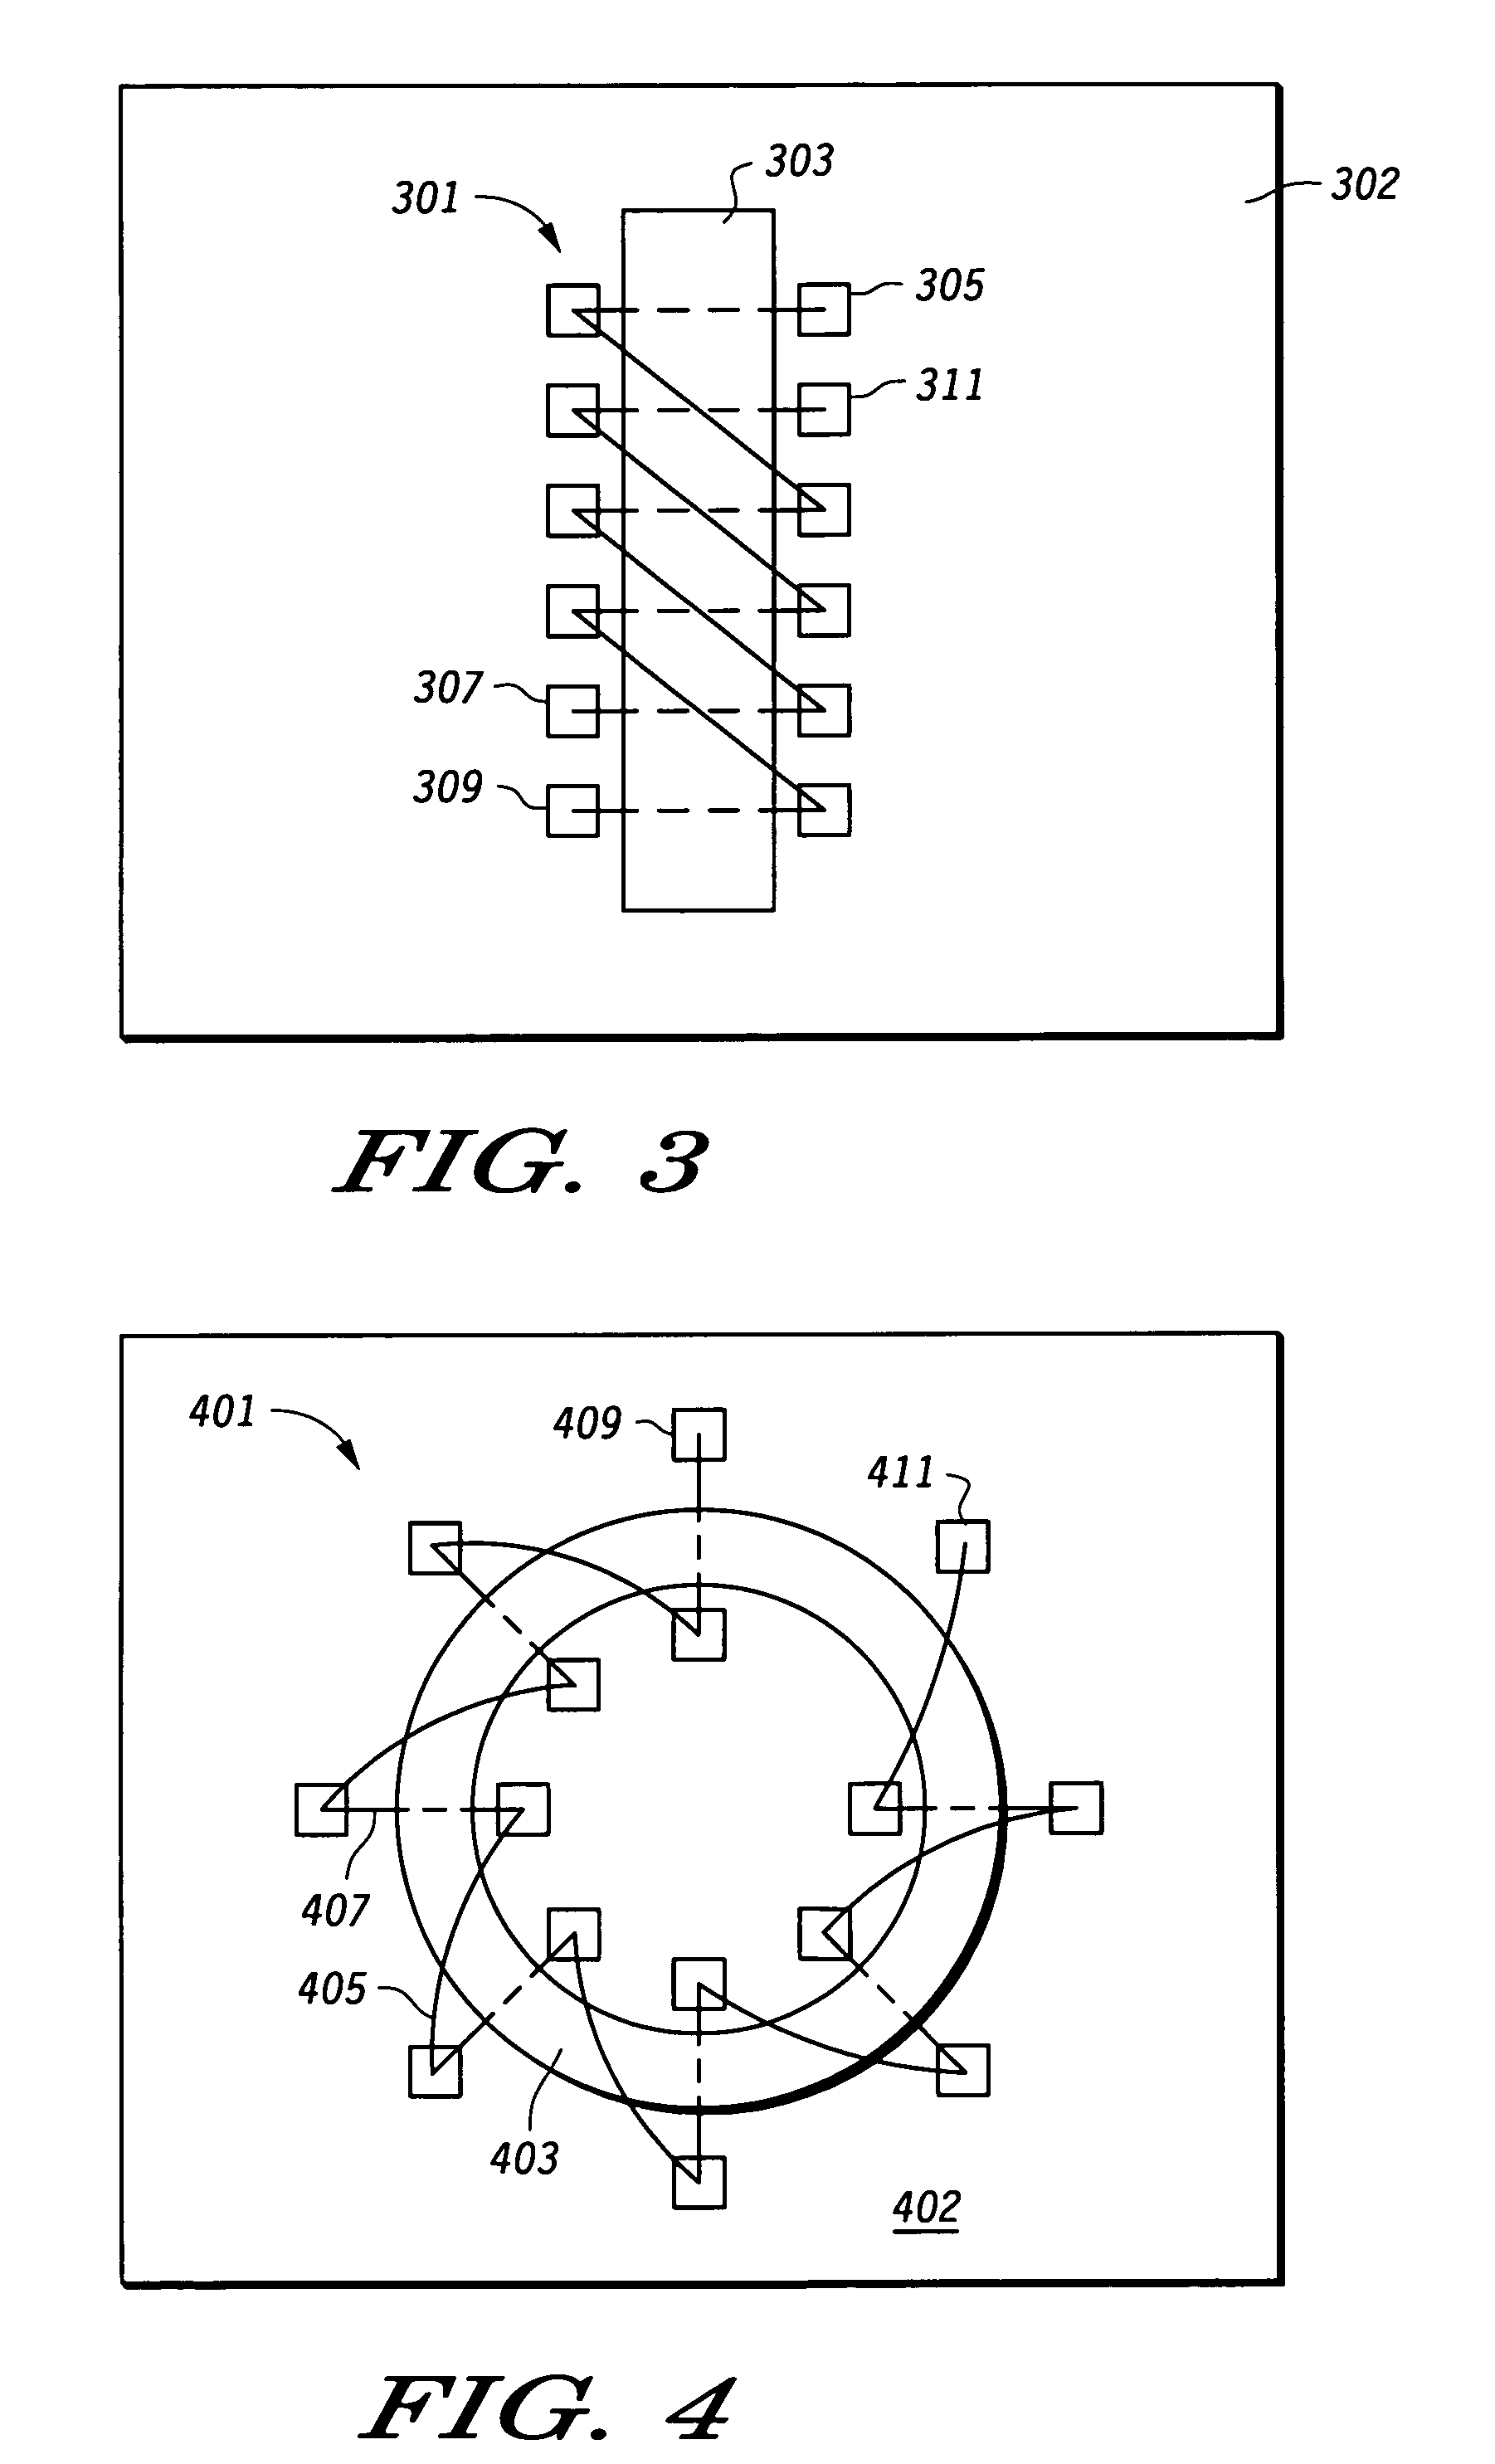 Inductive device including bond wires